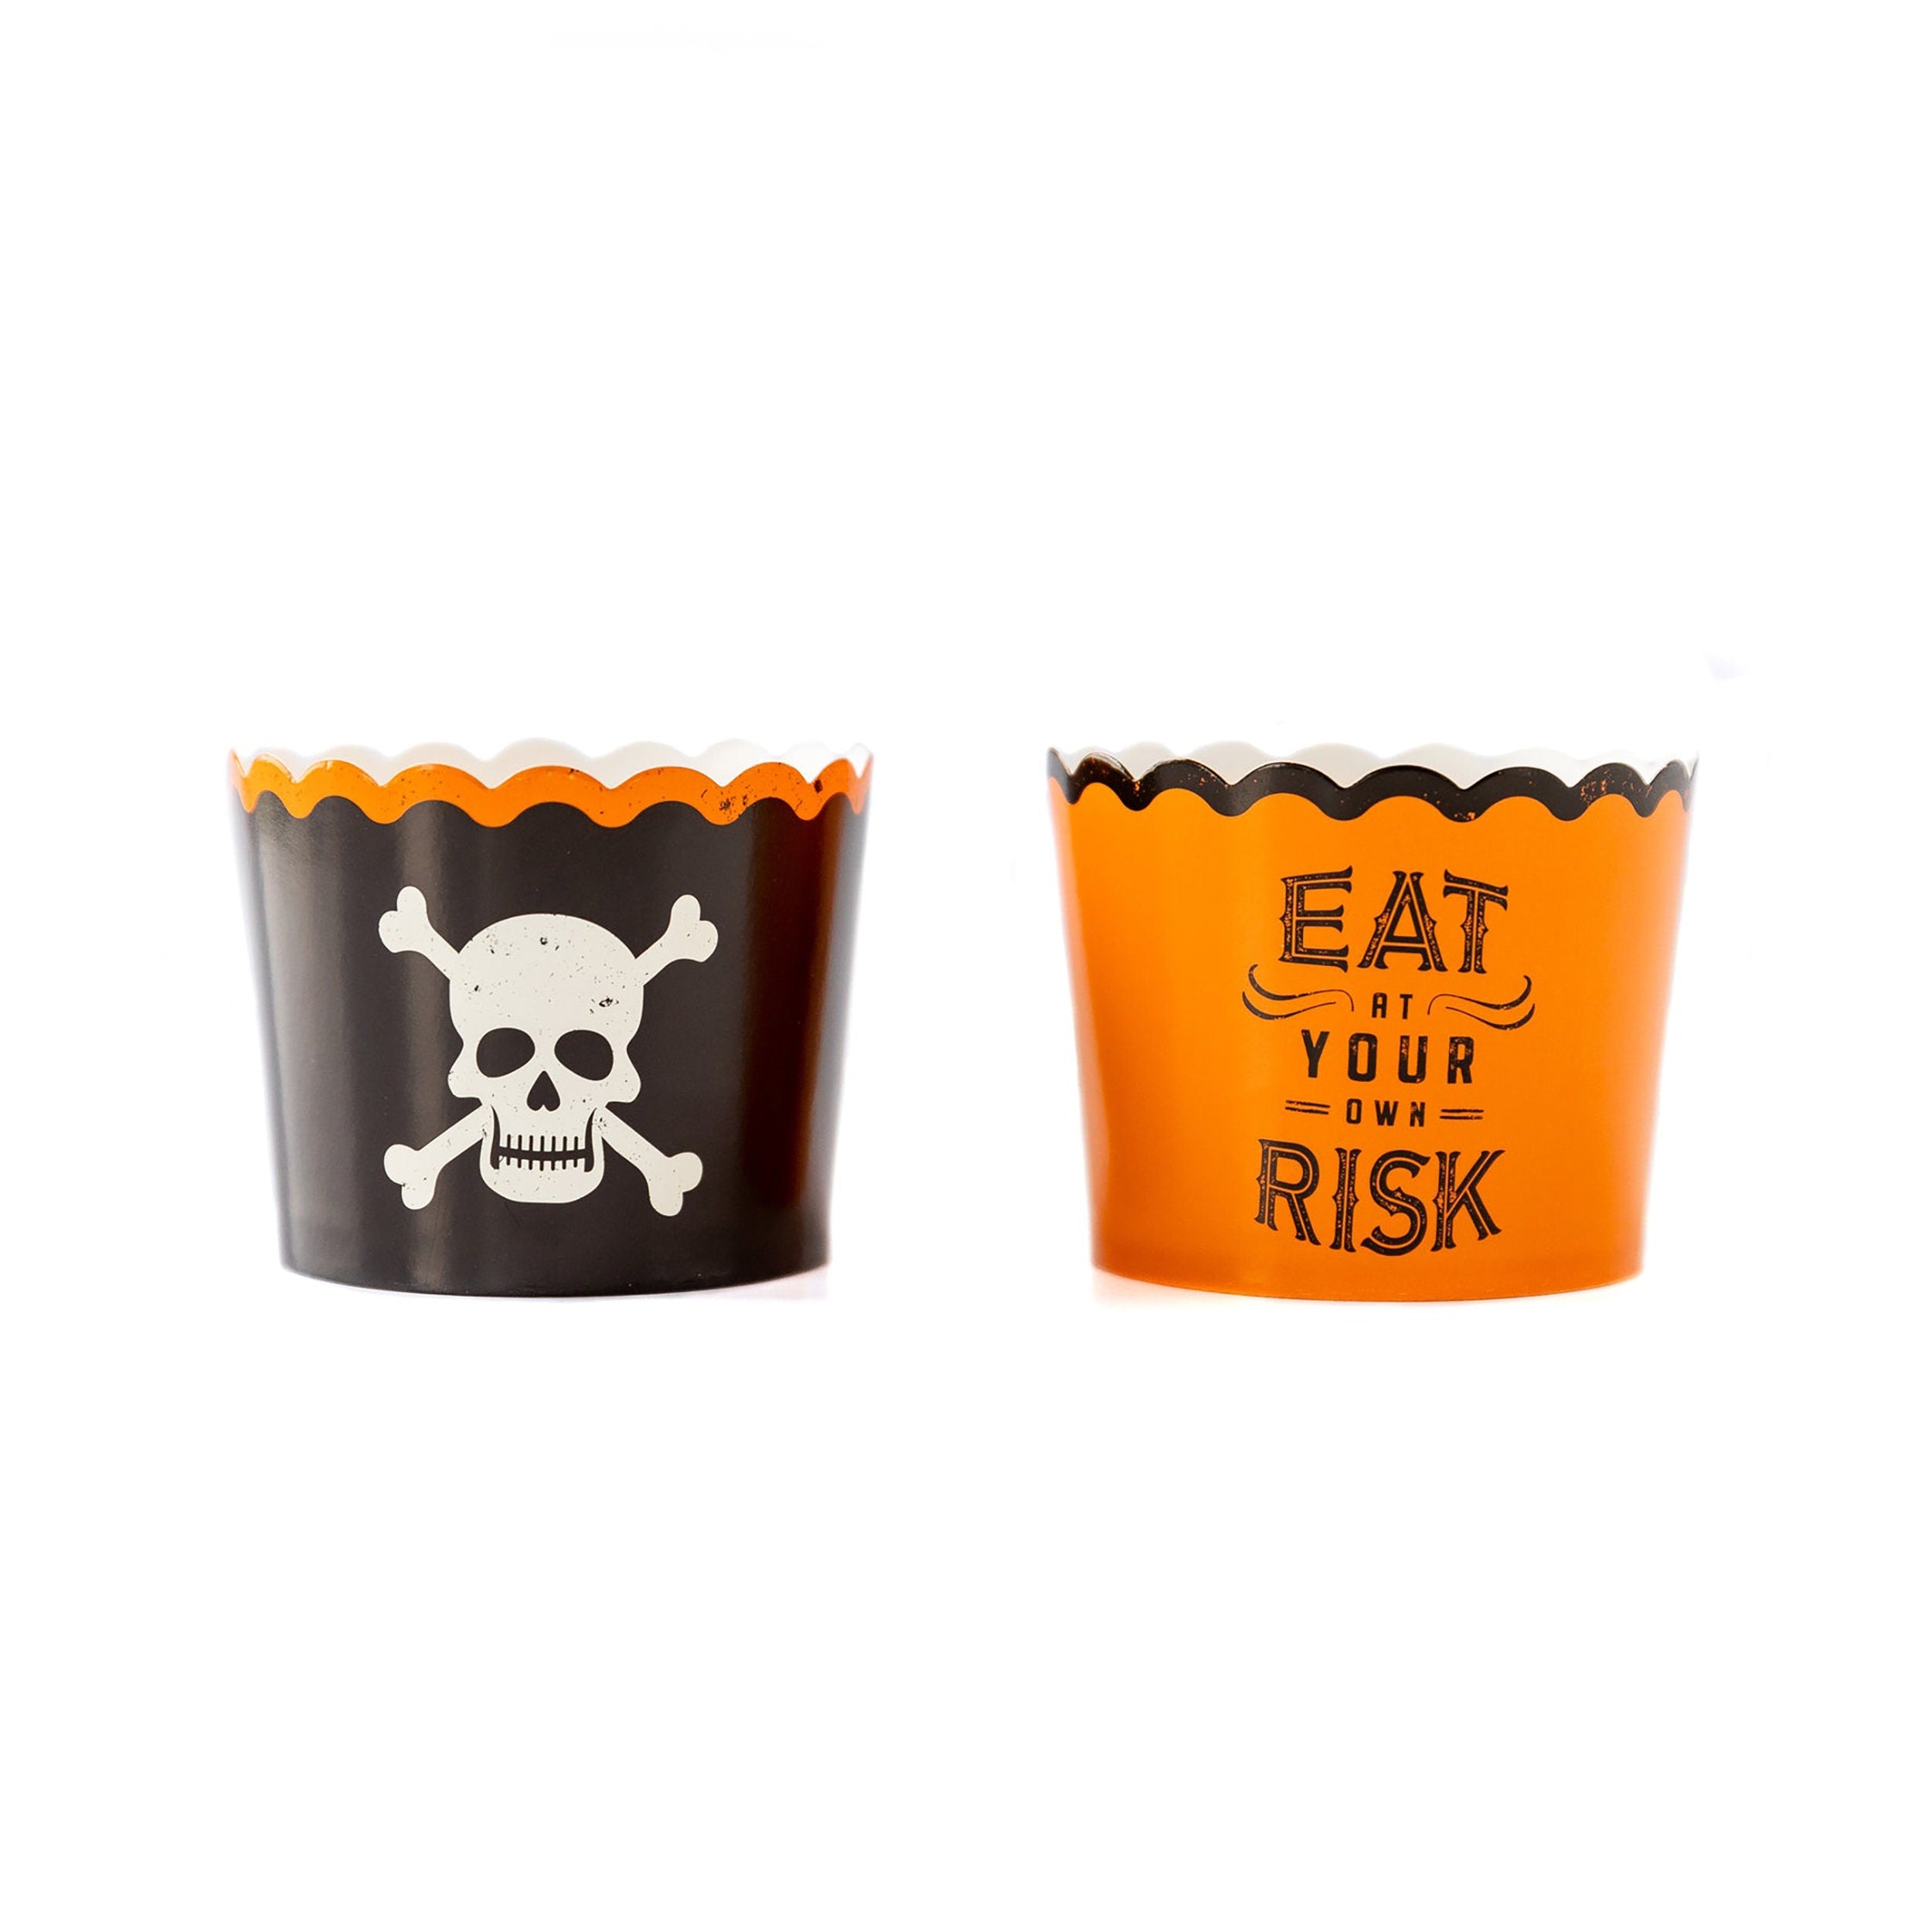 Paper Baking Cups - 50pc | Paper Snack Cup - Treat Cup - Disposable Snack Cup - Halloween Paper Cup - Halloween Treat Cups